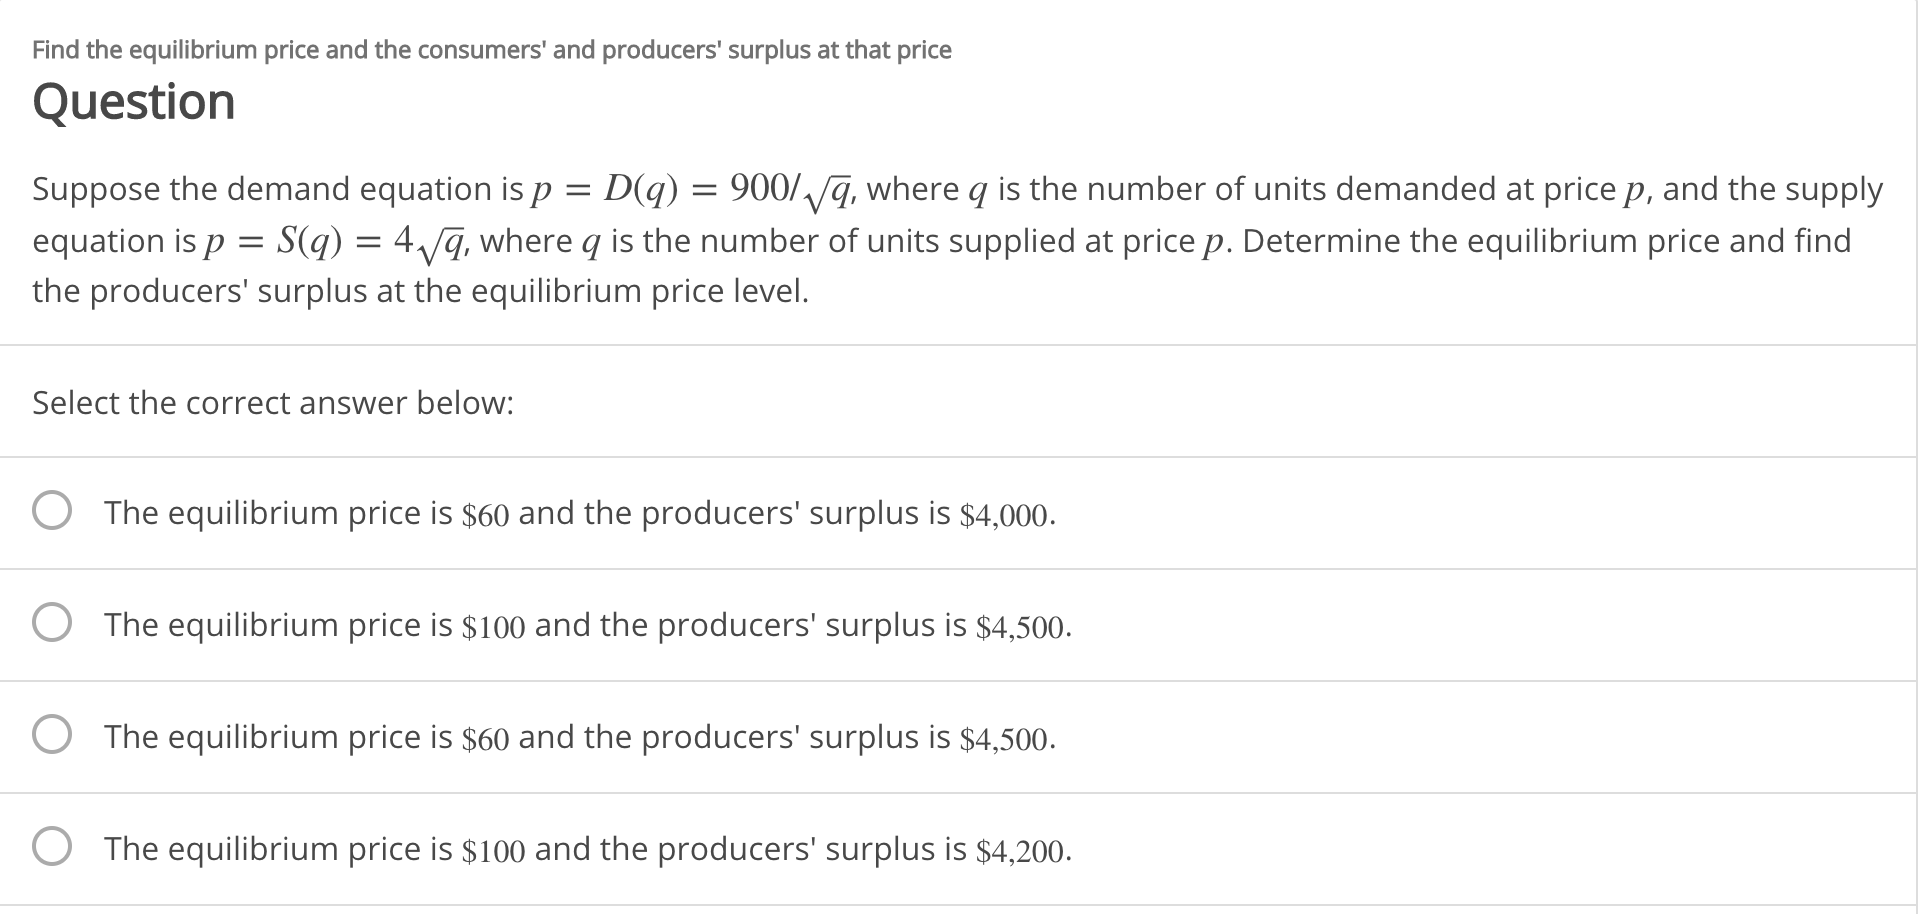 Find the equilibrium price and the consumers' and producers' surplus at that price
Question
Suppose the demand equation isp = D(q) = 900/ q, where q is the number of units demanded at price p, and the supply
equation is p = S(q) = 4/q, where q is the number of units supplied at price p. Determine the equilibrium price and find
the producers' surplus at the equilibrium price level.
Select the correct answer below:
The equilibrium price is $60 and the producers' surplus is $4,000.
The equilibrium price is $100 and the producers' surplus is $4,500.
The equilibrium price is $60 and the producers' surplus is $4,500.
O The equilibrium price is $100 and the producers' surplus is $4,200.
